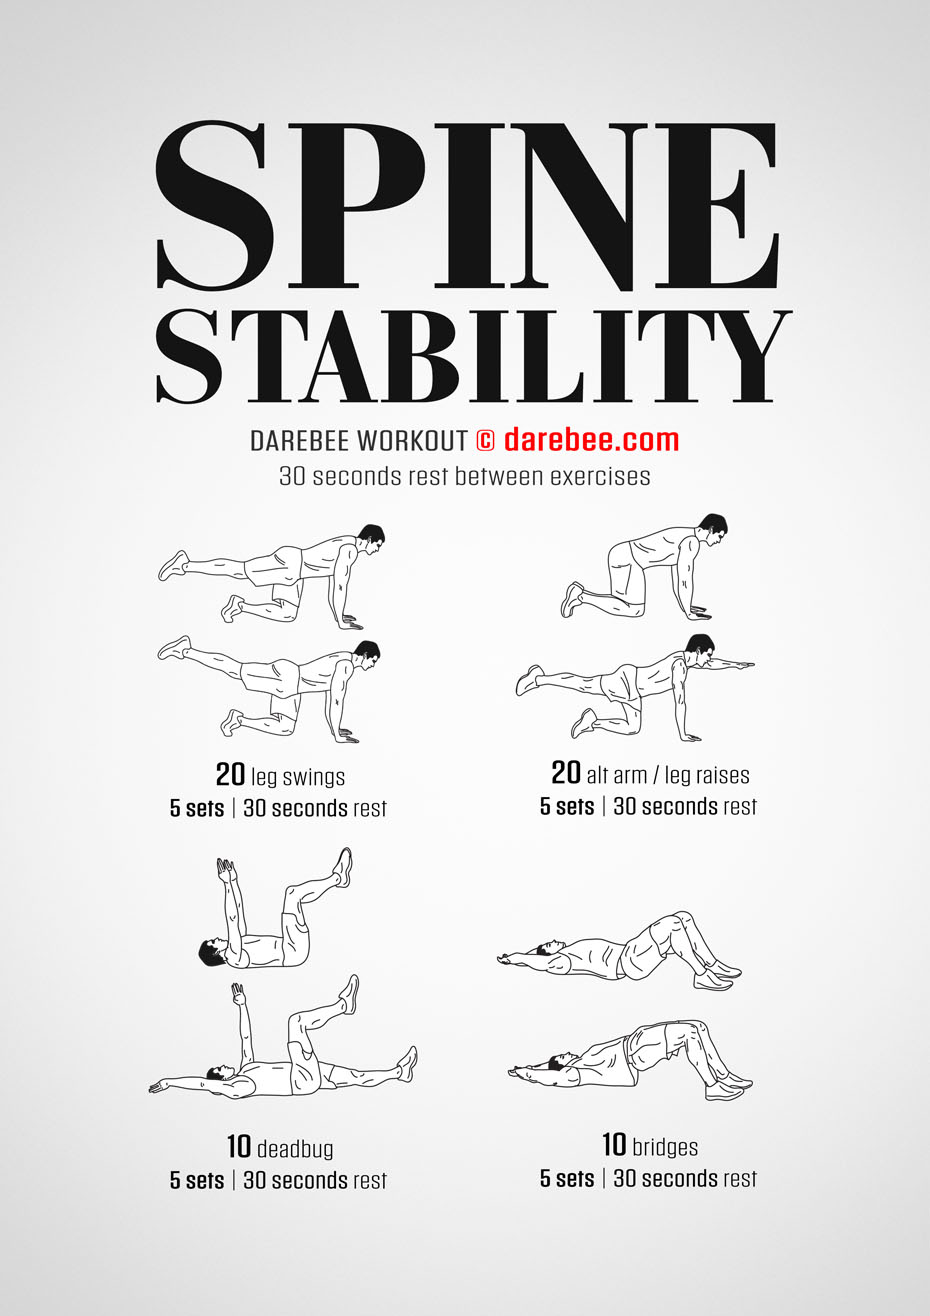 Spine Stability is a Darebee home-fitness workout that helps you develop a strong back and a better posture. 